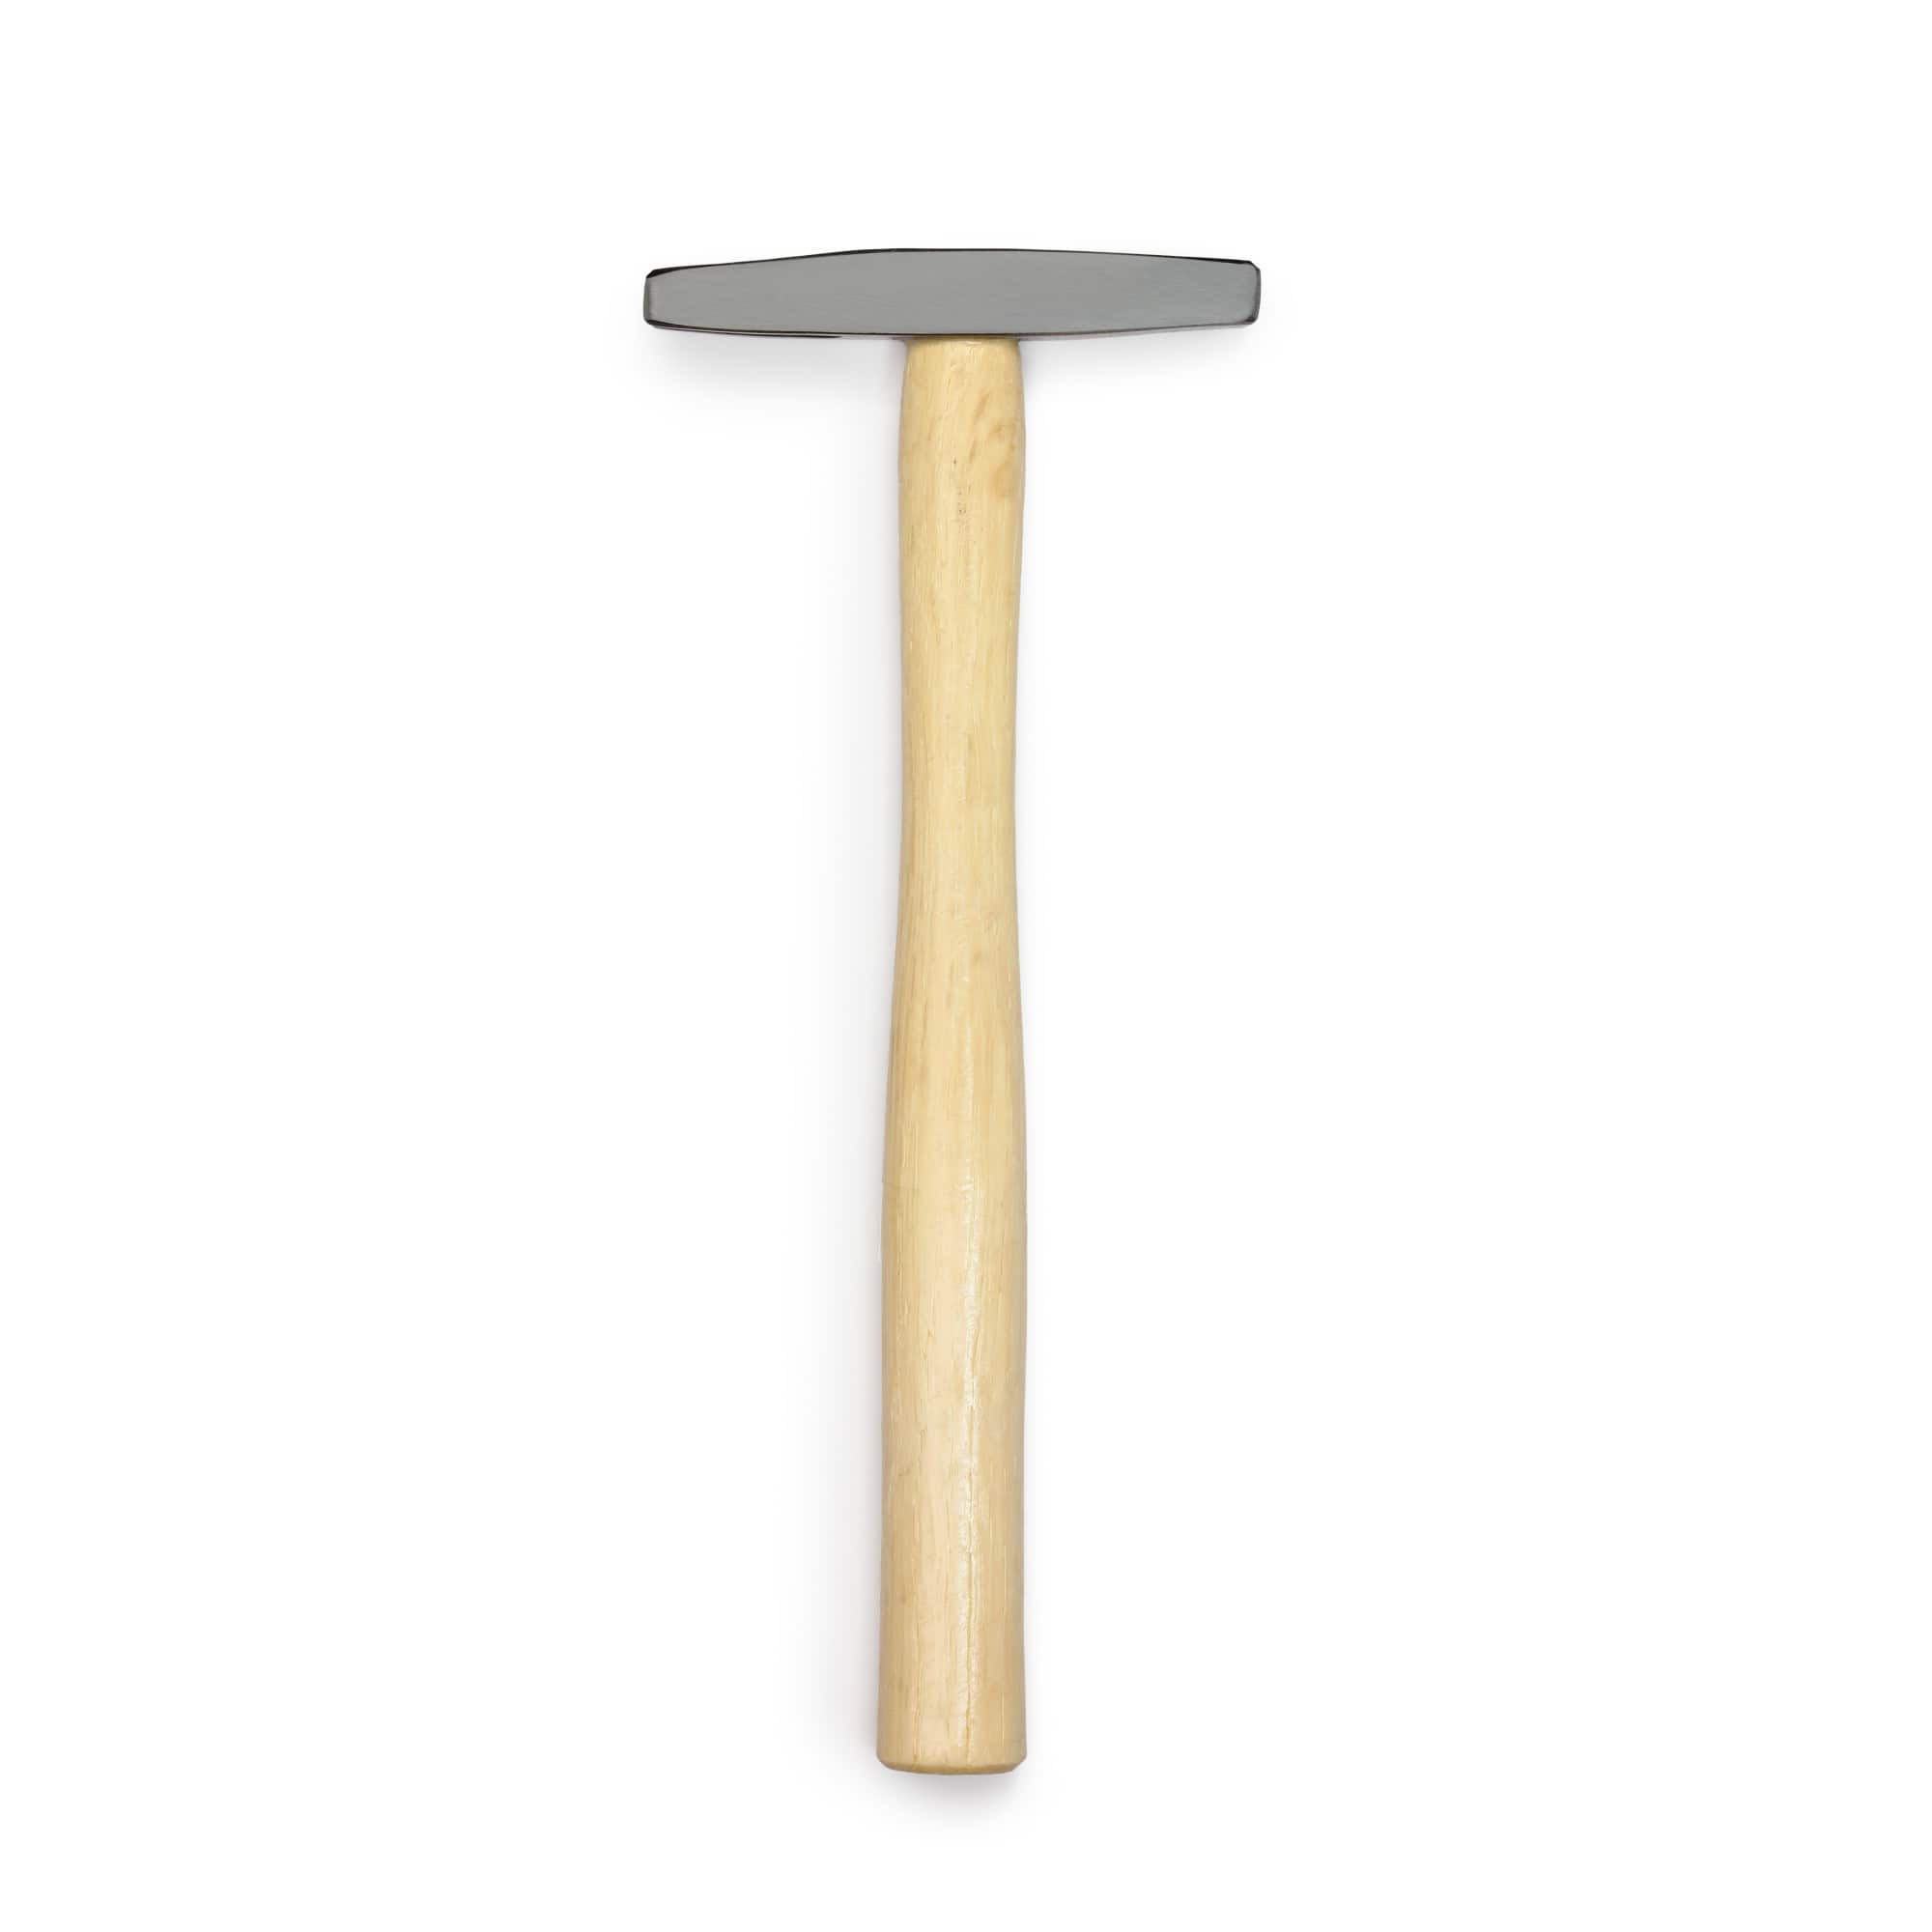 Dritz&#xAE; Home Tack Hammer with Wooden Handle